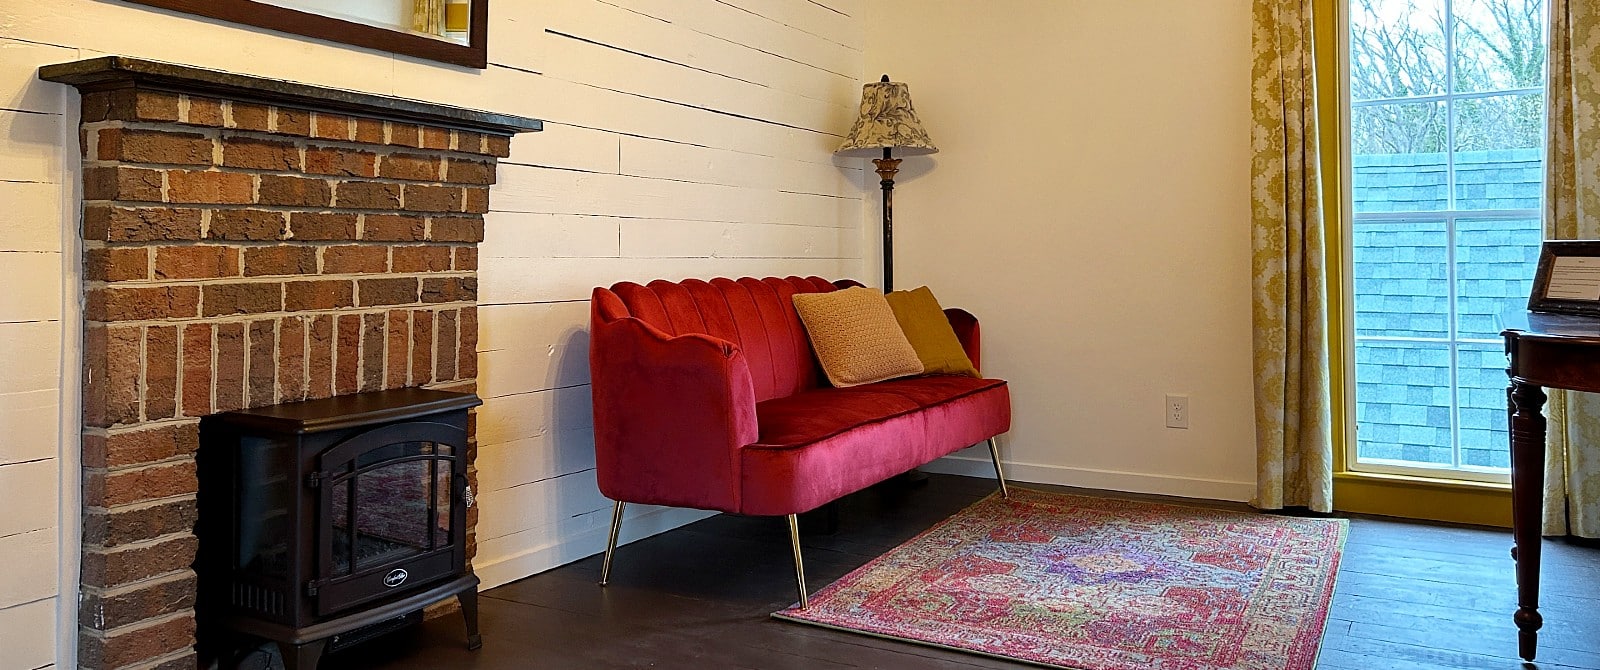 Gorgeous red velvet couch with a rug by a brick fireplace and large window with floral curtains